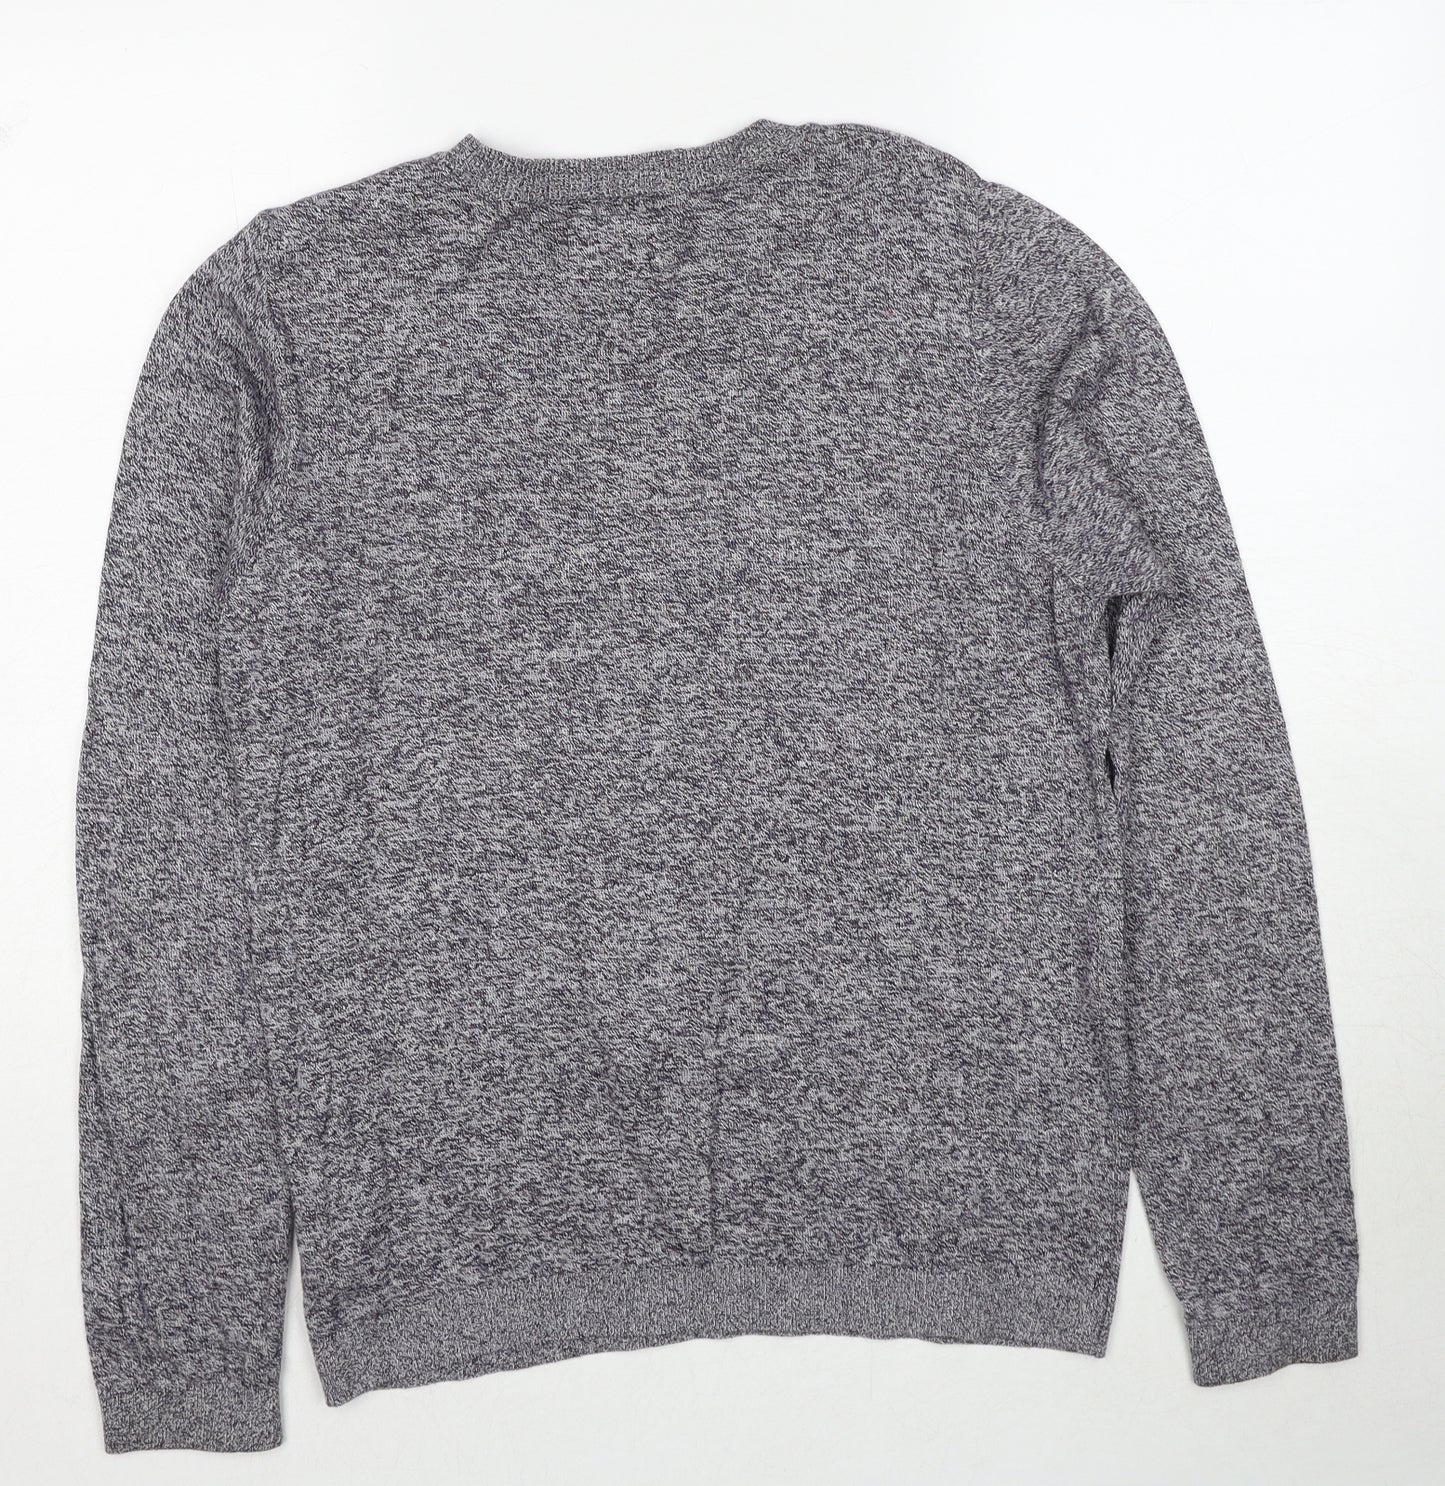 Topman Mens Grey Round Neck Cotton Pullover Jumper Size S Long Sleeve